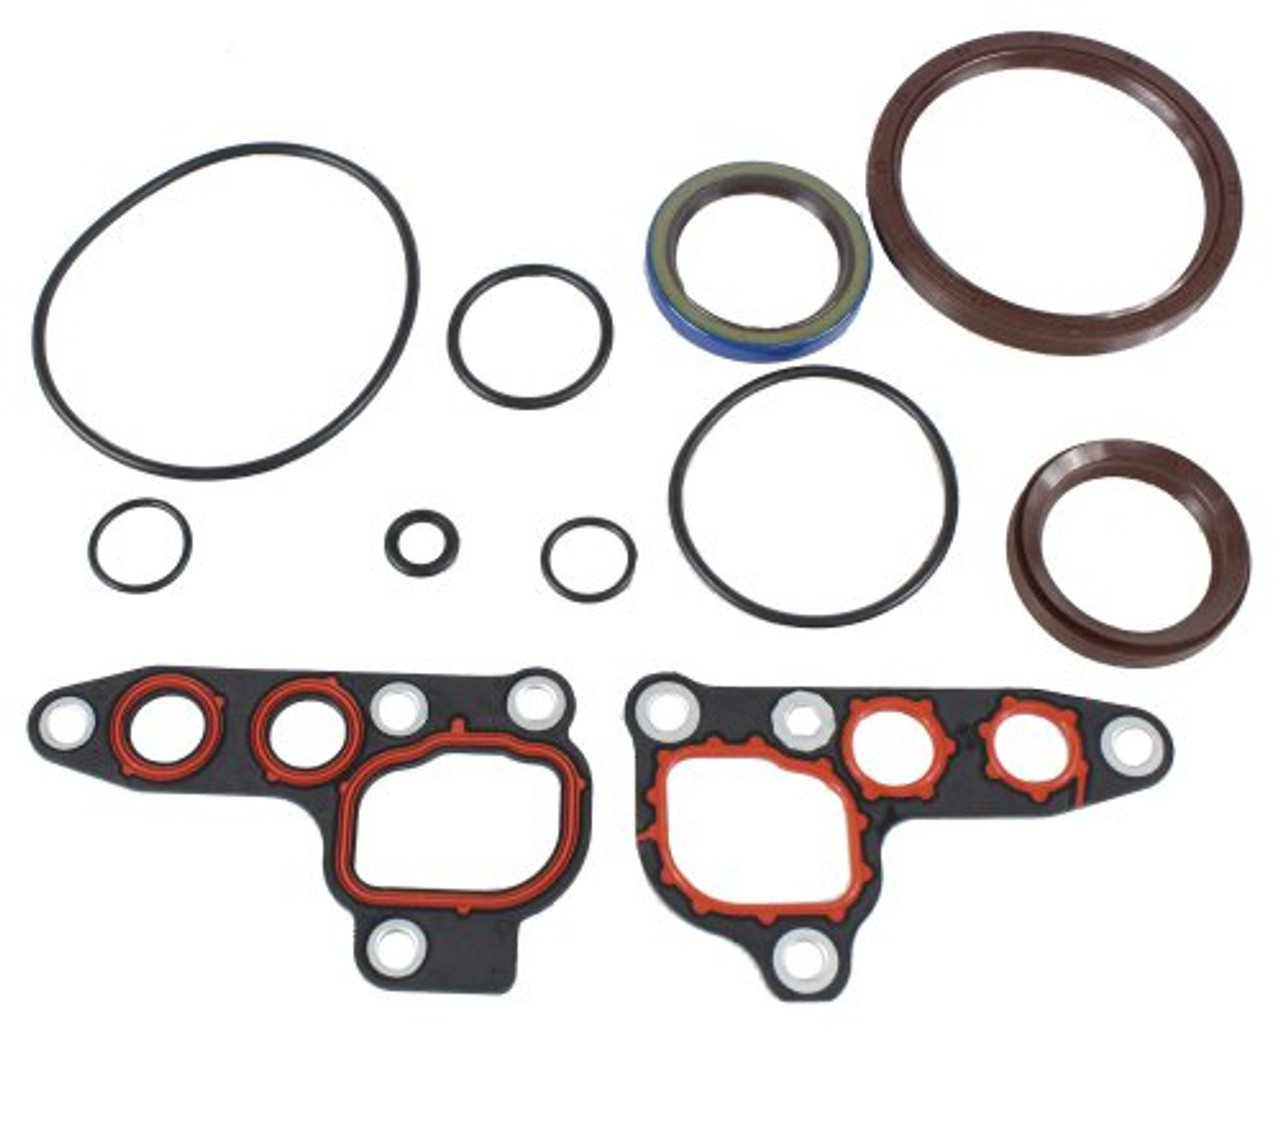 Lower Gasket Set - 2006 Ford Expedition 5.4L Engine Parts # LGS4150ZE165